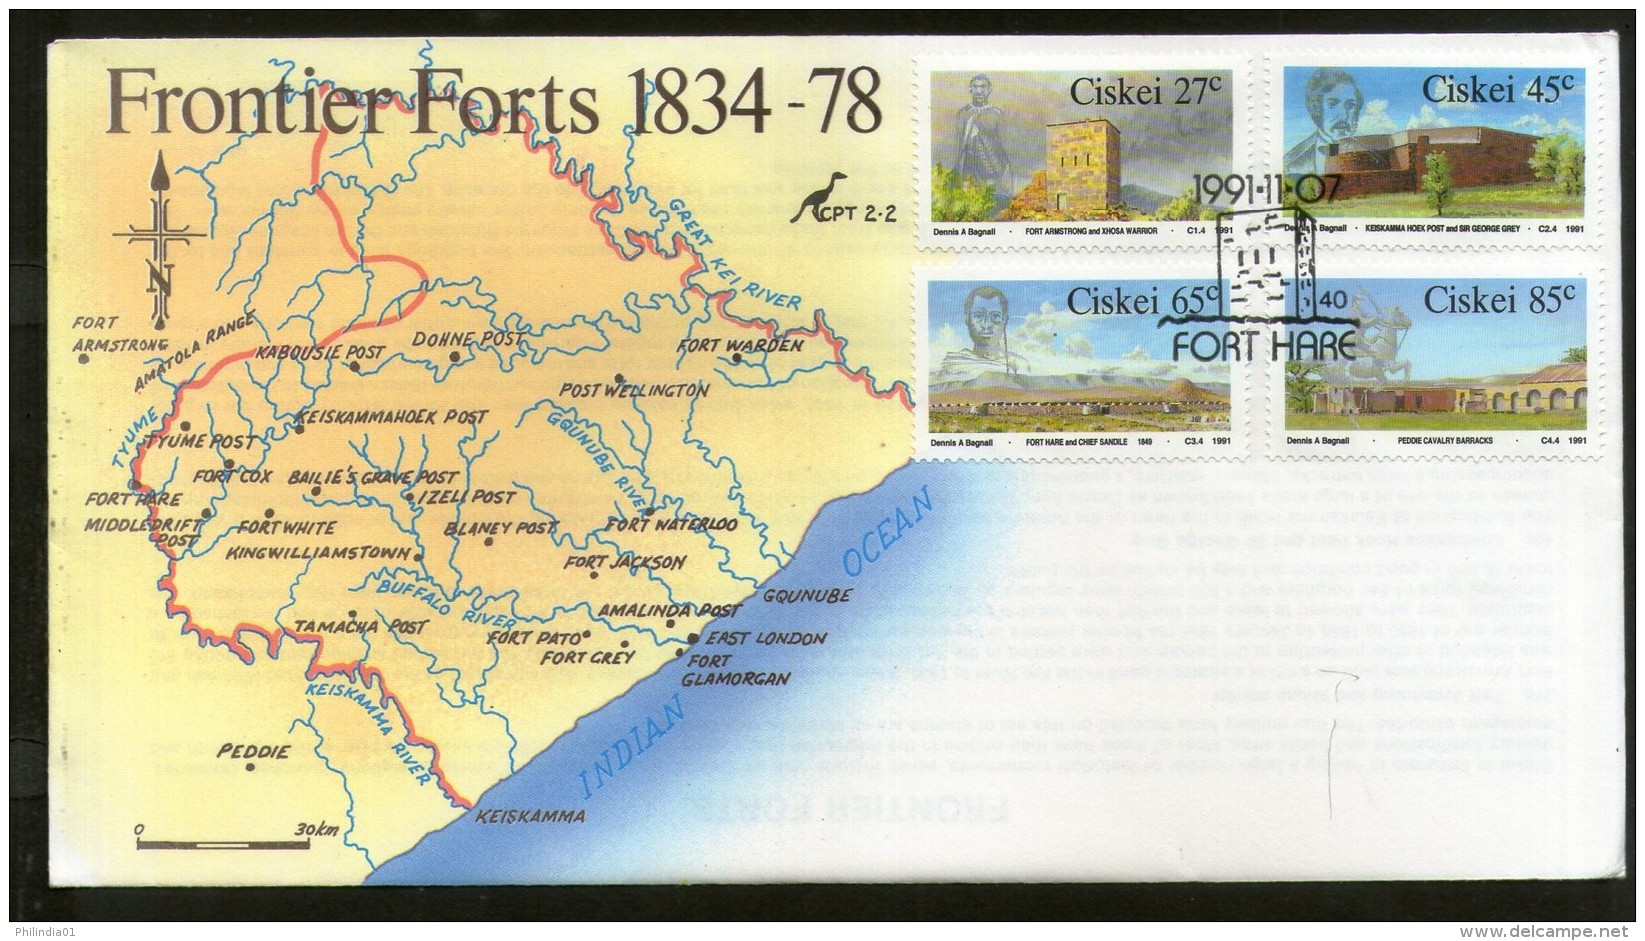 Ciskei 1991 Frontier Forts Map Architecture Sc 183-86  FDC # 16200 - Castles